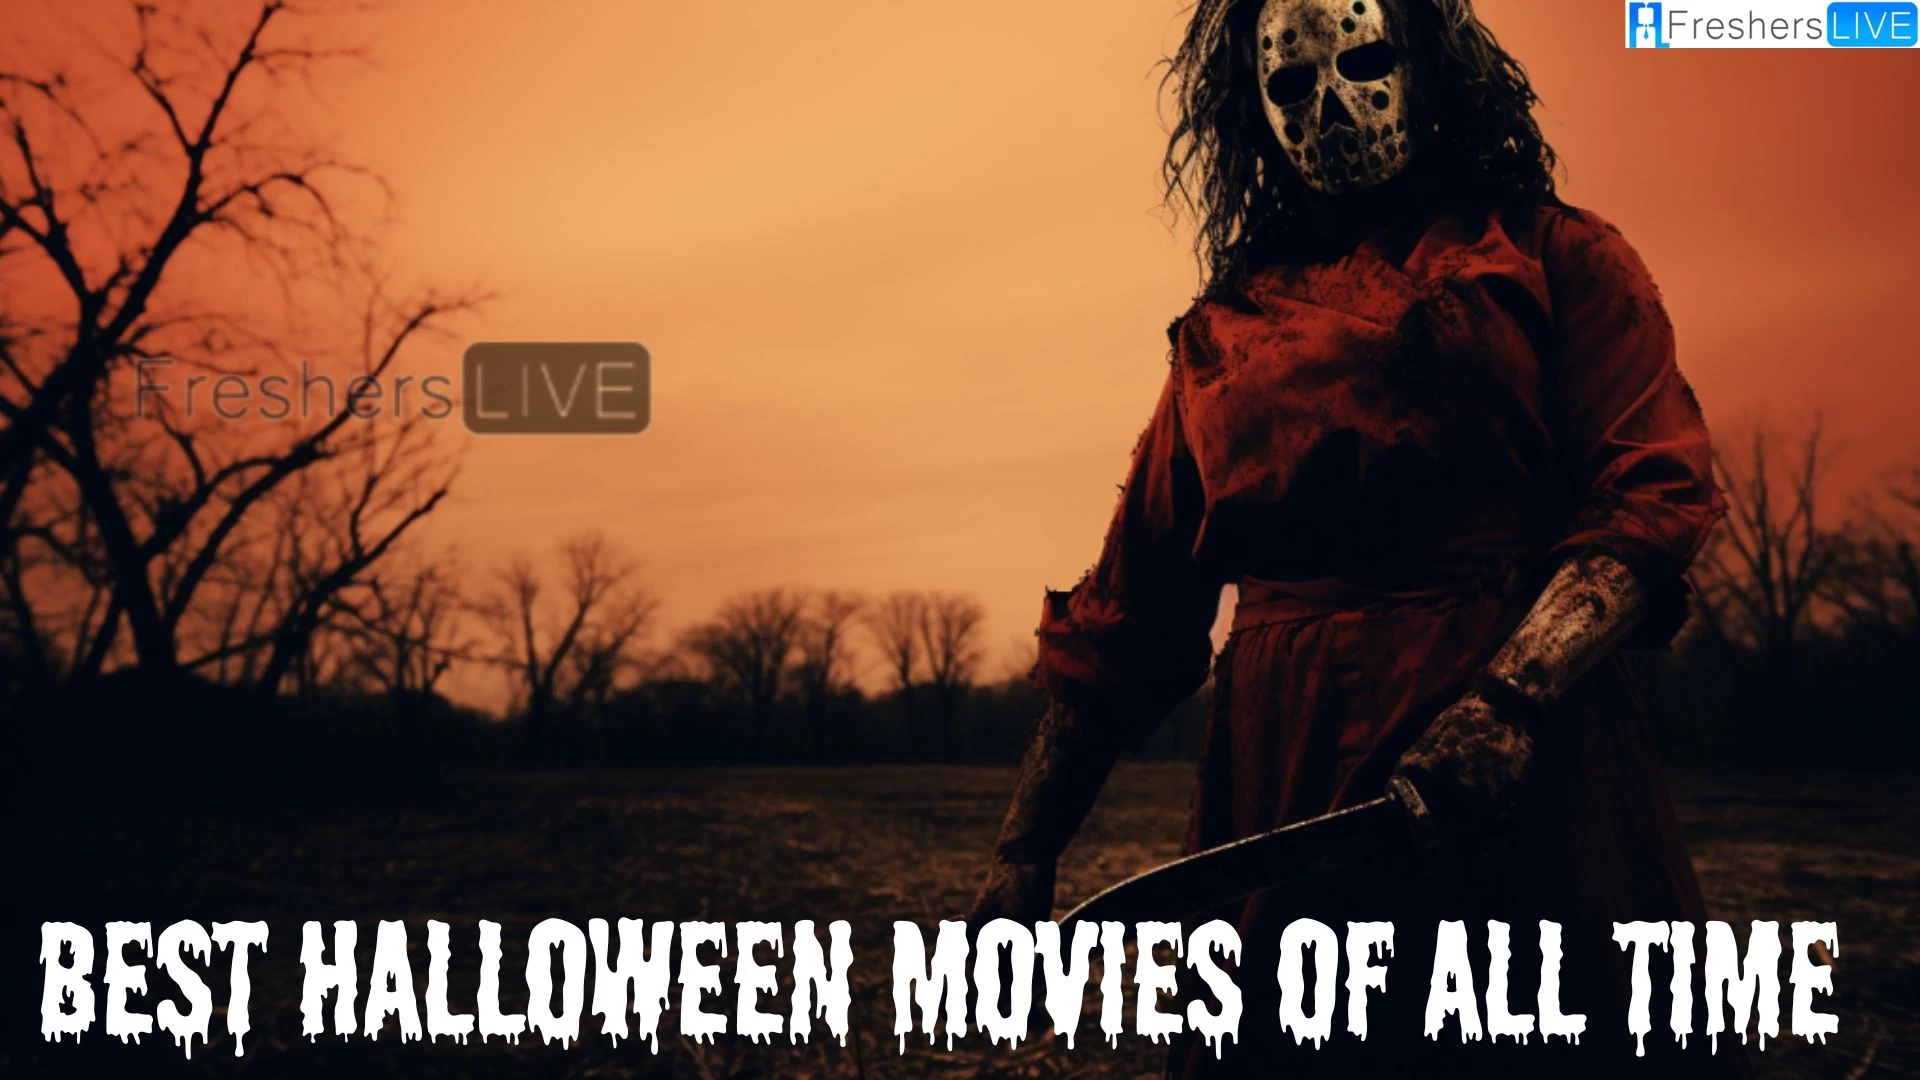 Best Halloween Movies of All Time - Top 10 Screams and Shadows